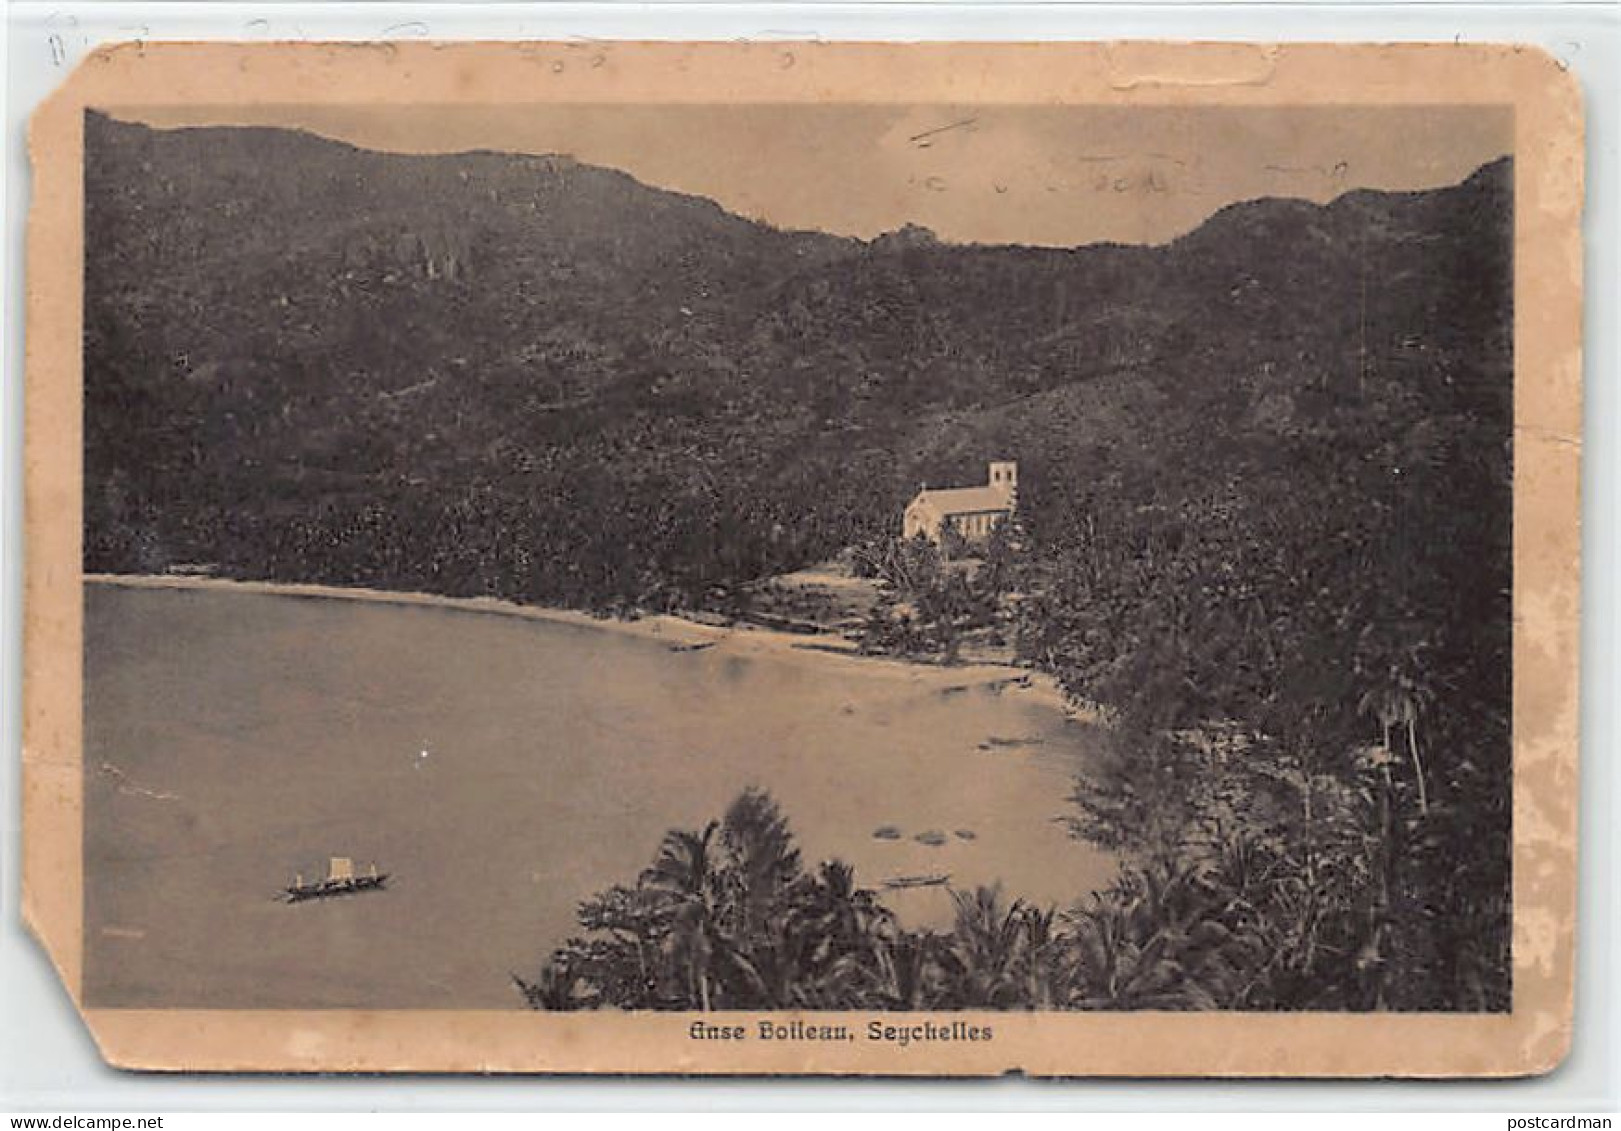 SEYCHELLES - Anse Boileau - SEE SCANS FOR CONDITION - Publ. Unknown  - Seychelles